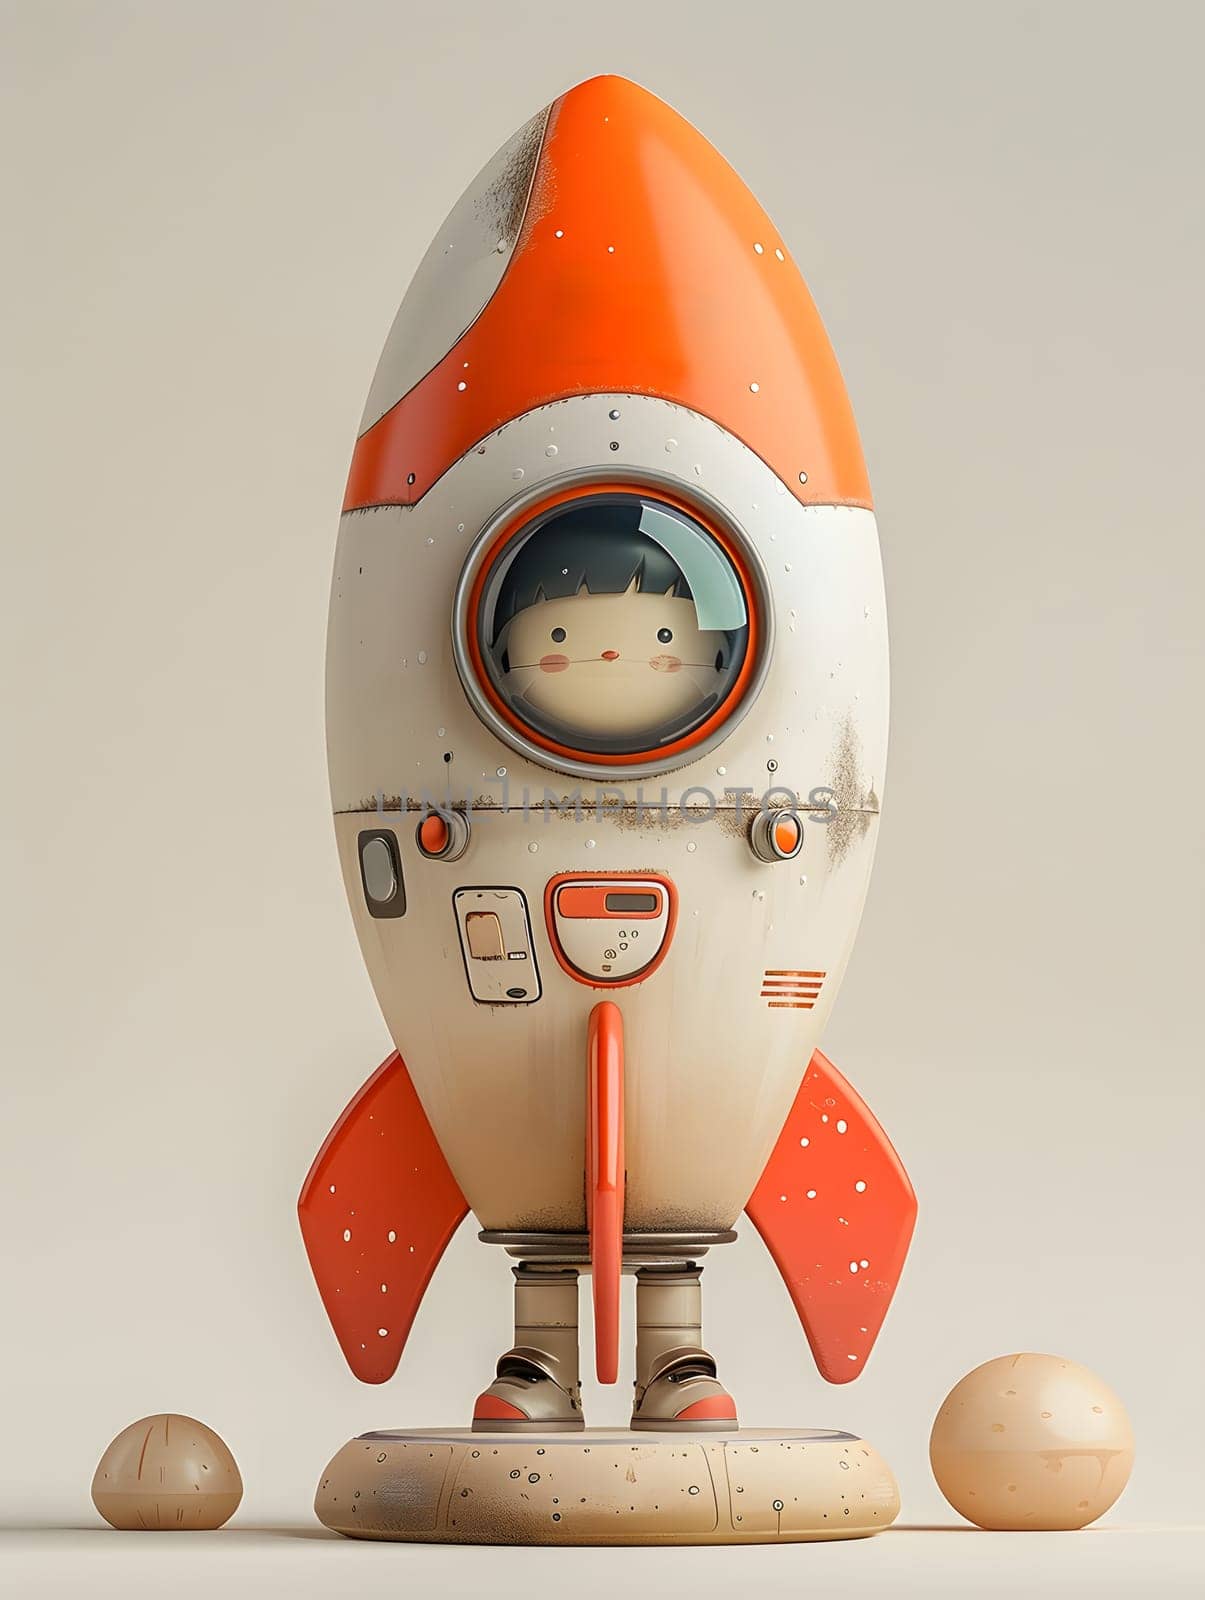 Action figure in toy rocket with Toy Carmine gas machine by Nadtochiy